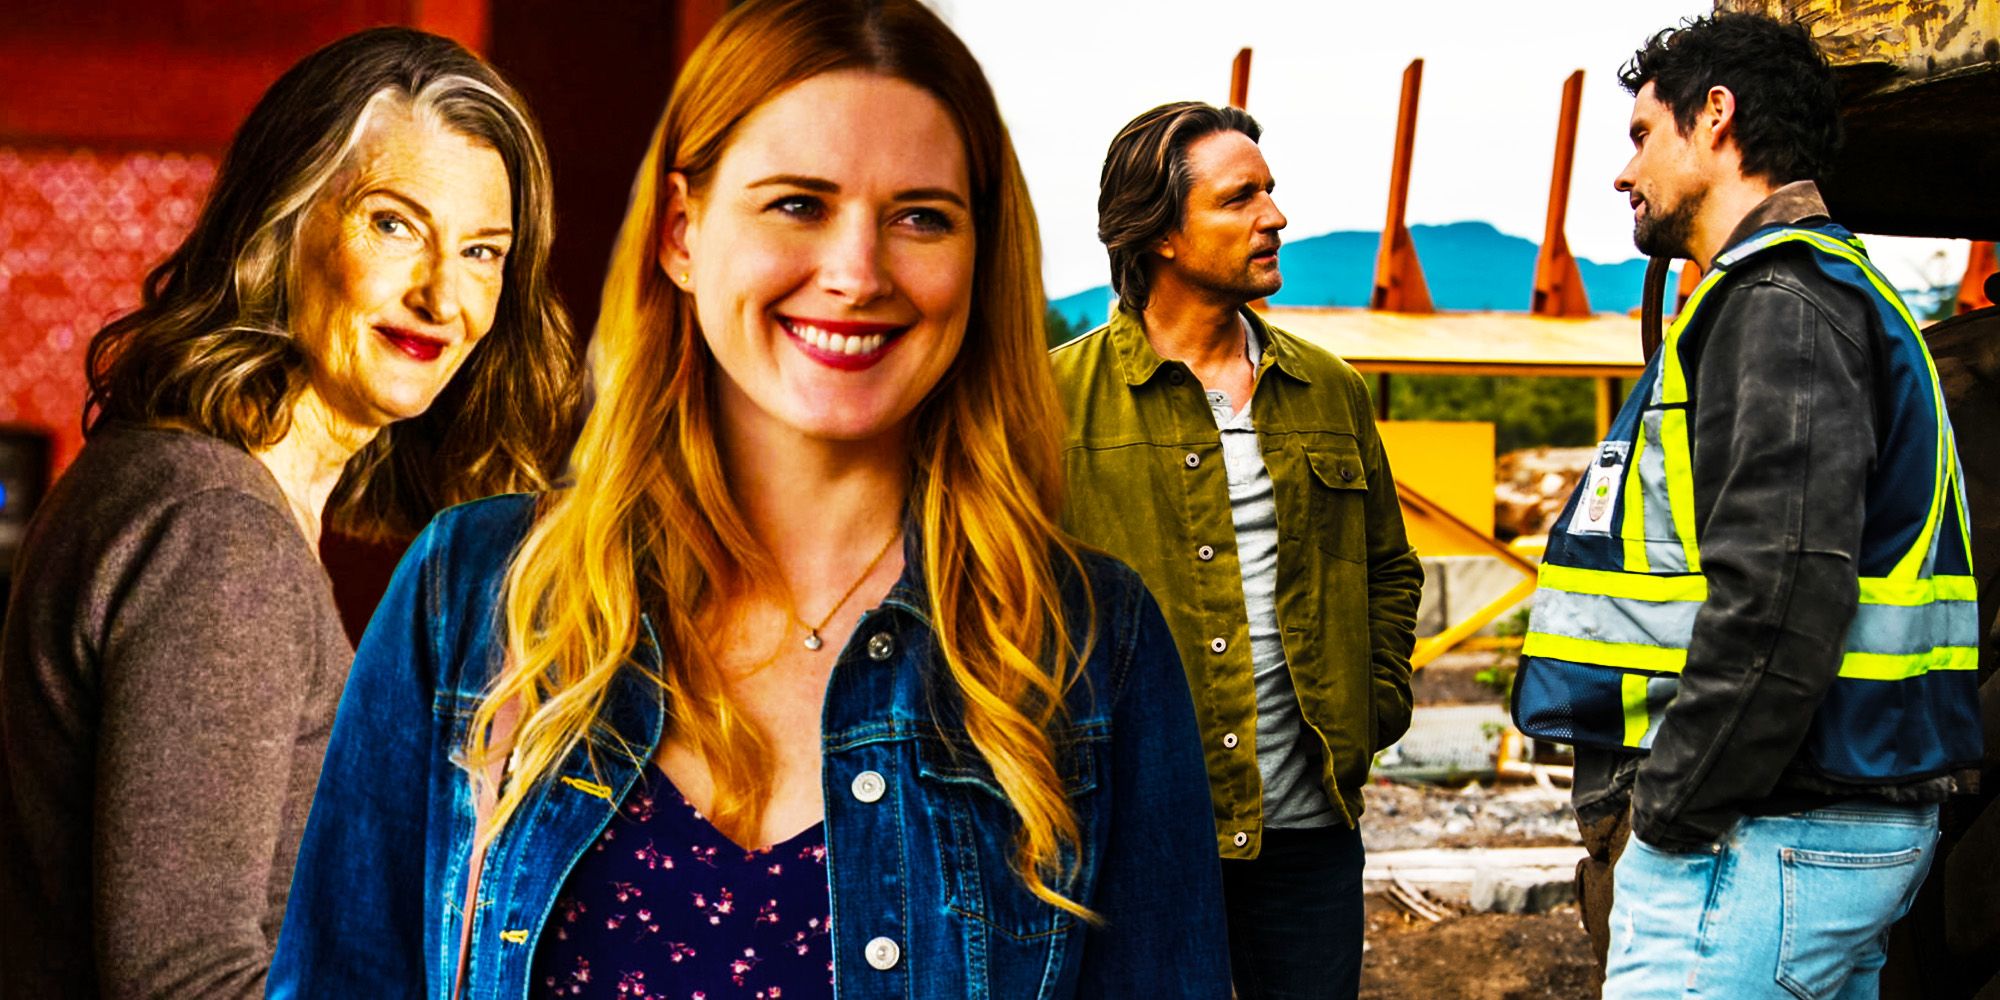 Virgin River Season 5 Premiere Date, Cast, Story & Everything We Know